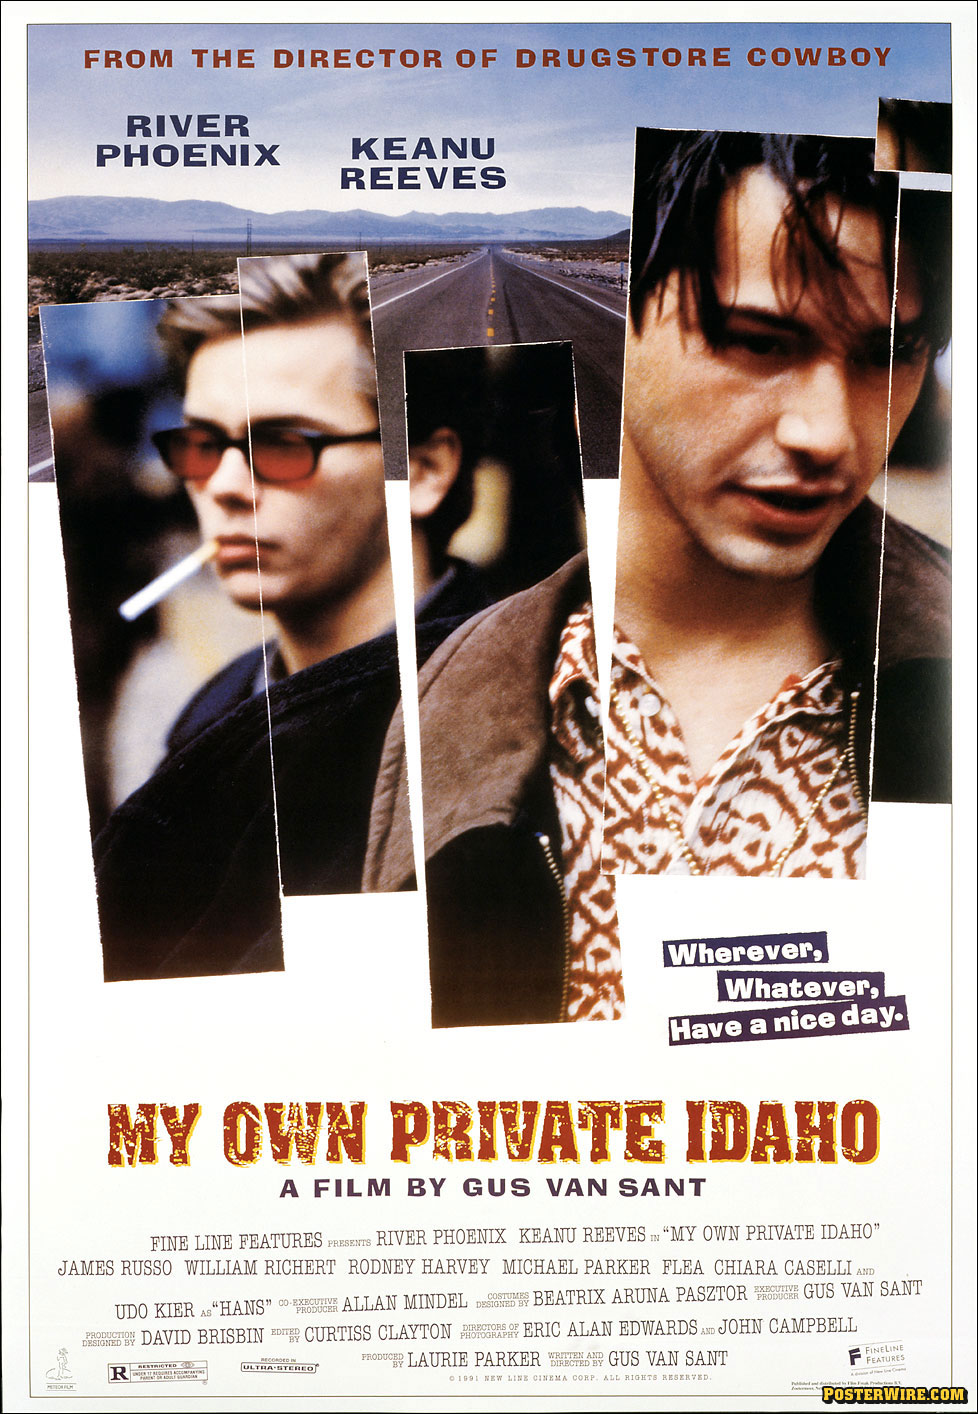 MY OWN PRIVATE IDAHO RIVER PHOENIX ICONIC WALKING ON HIGHWAY 24X36 POSTER 